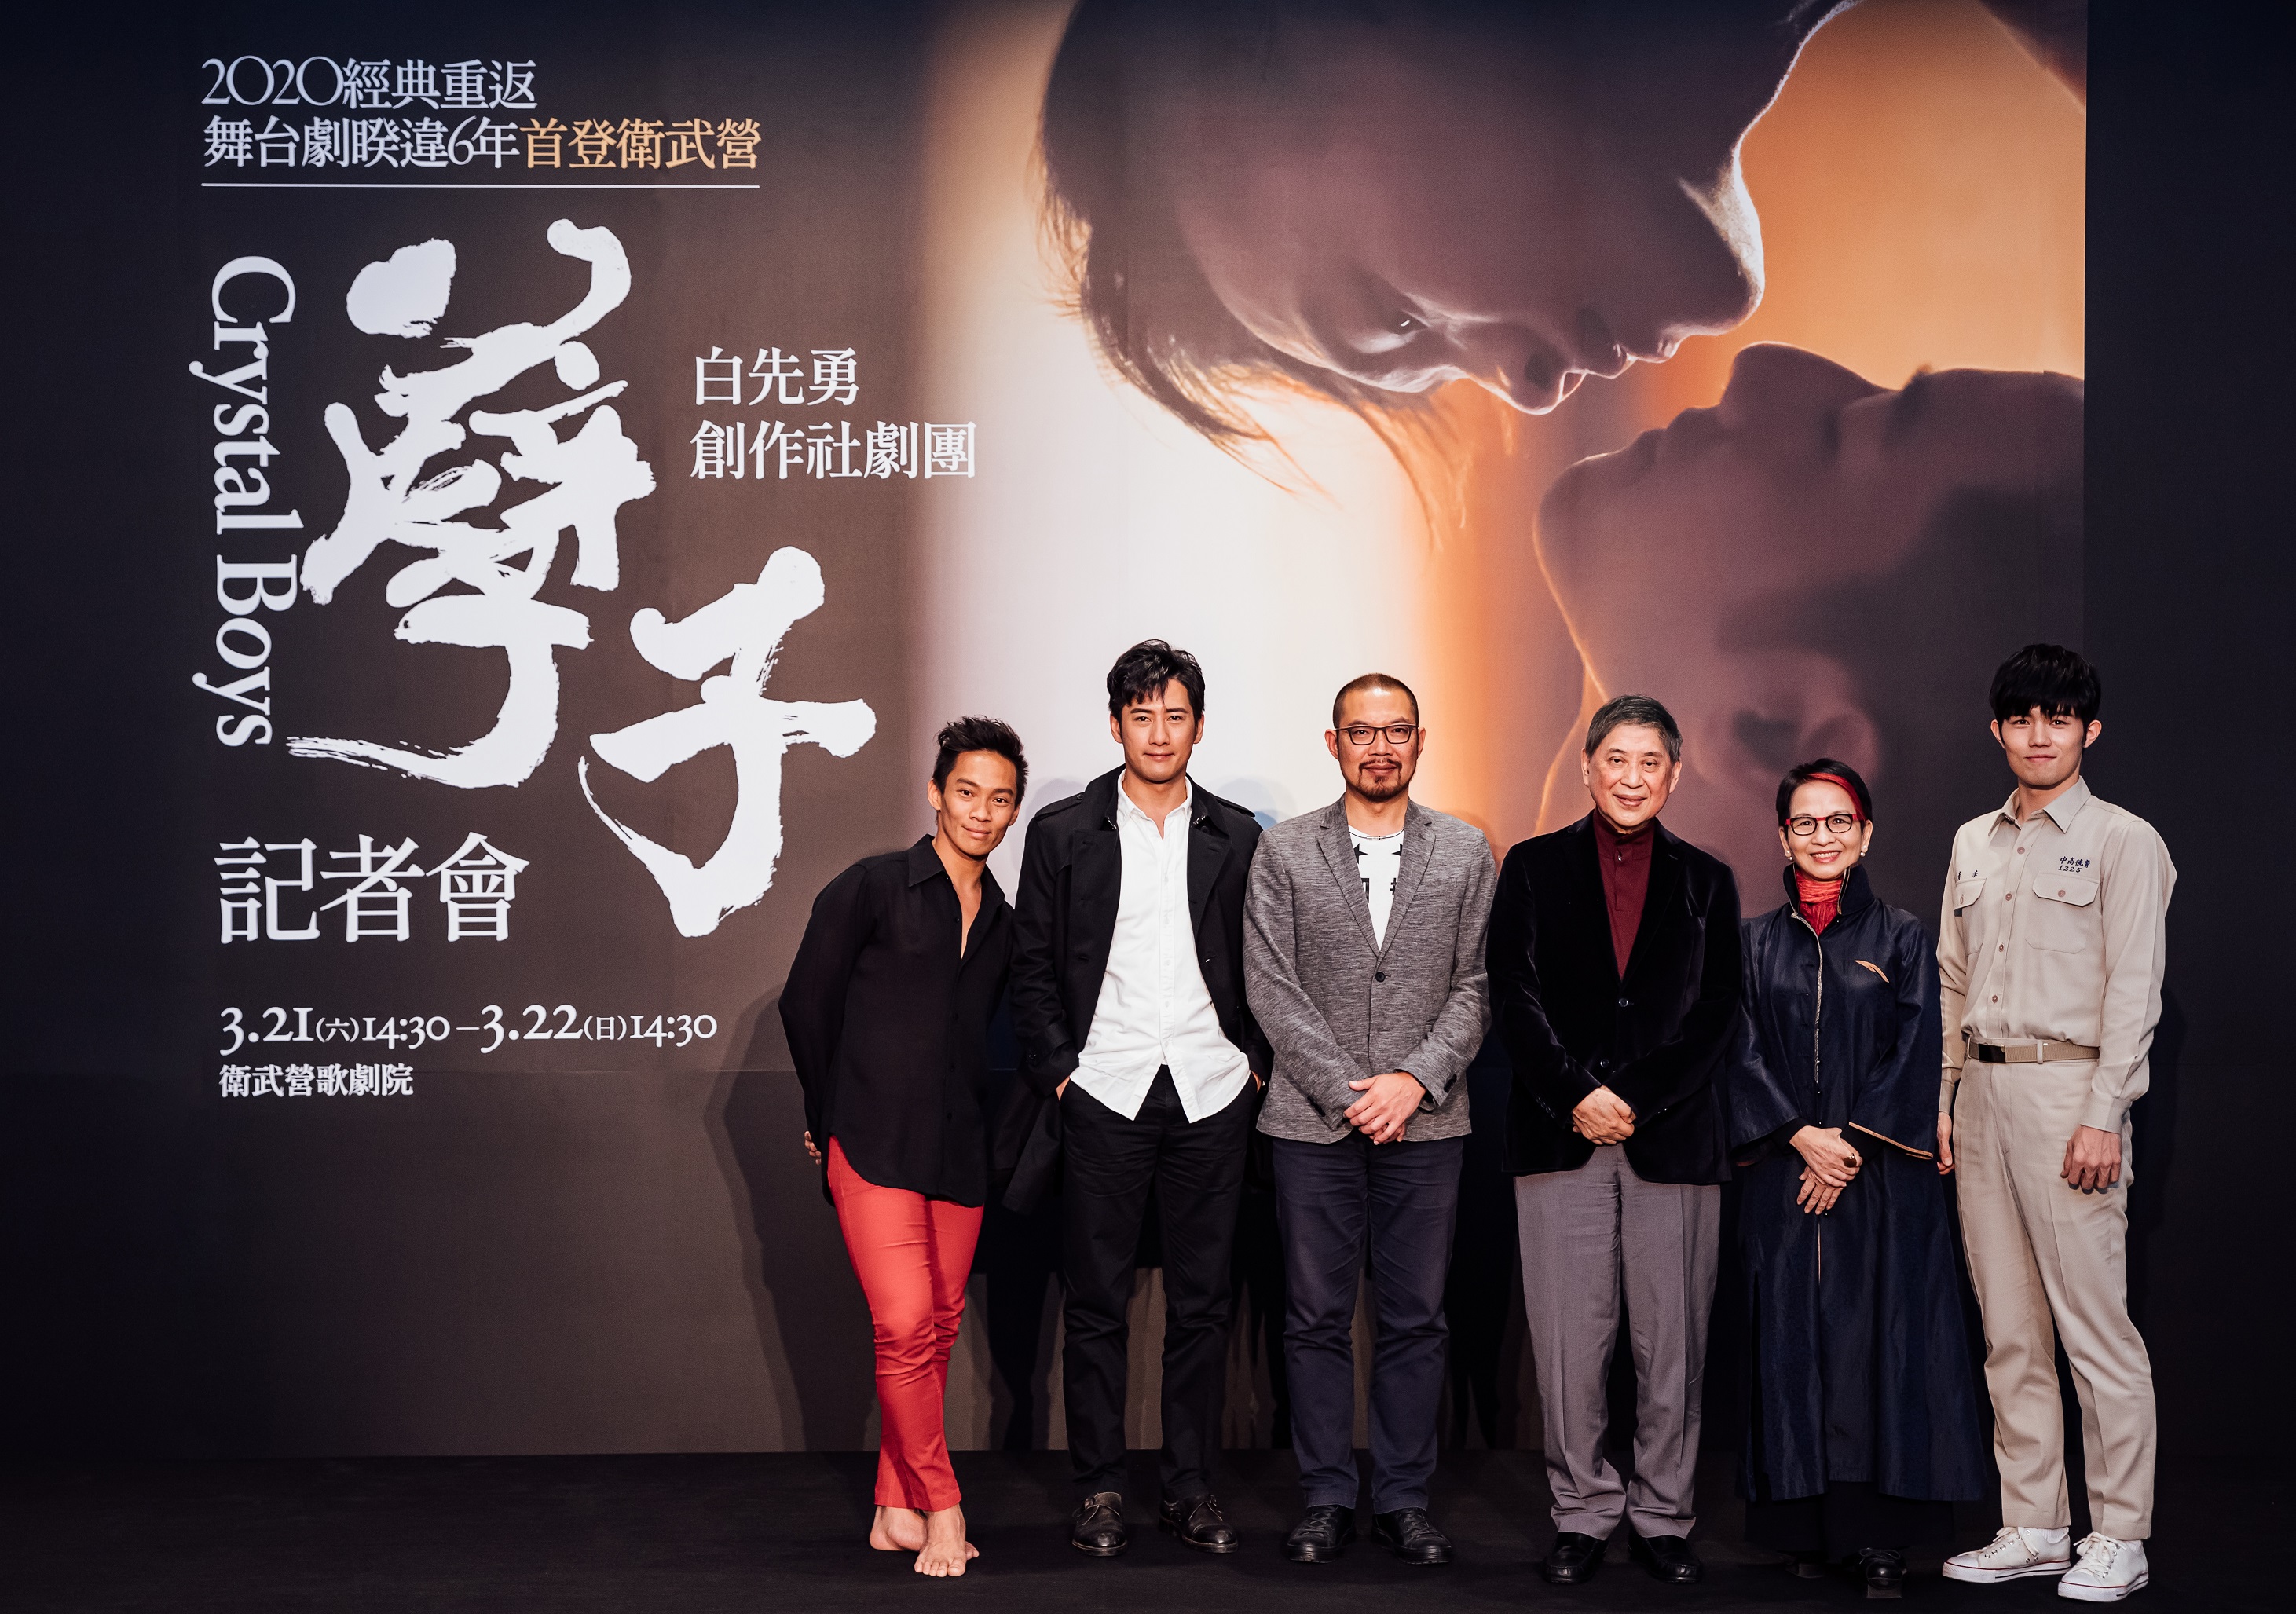 Crystal Boys, a classic novel written by literature master Pai Hsien-yung, will now be performed on stage at the National Kaohsiung Center for the Arts (Weiwuying). 